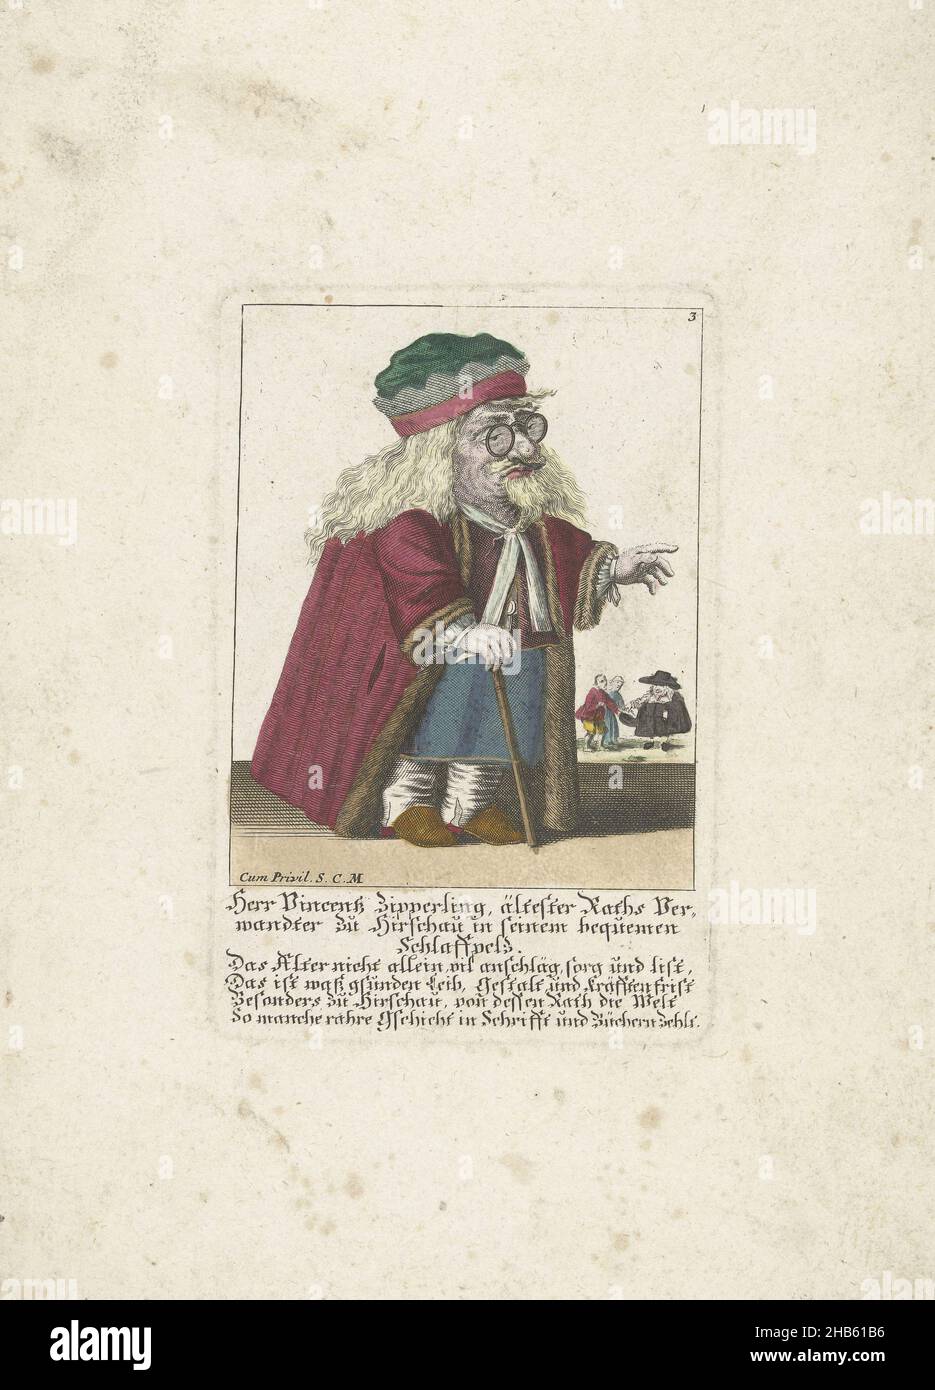 The dwarf Vincentz Zipperling in a fur coat, c. 1710, Herr Vincentz Zipperling, ältester Raths verwandter zu Hirschau in seinem bequemen Schlaffpelz (title on object), Il Callotto resurcitato oder Neu eingerichtes Zwerchen Cabinet (series title), The dwarf Vincentz Zipperling in a fur coat. In the caption below the title, a four-line verse in German. Numbered upper right: 3. Part of a loose-leaf edition from c. 1710 of a series of caricatures featuring dwarfs, known as The Dwarf Stage., print maker: Martin Engelbrecht (attributed to), unknown (mentioned on object), Augsburg, 1705 - 1715, paper Stock Photo